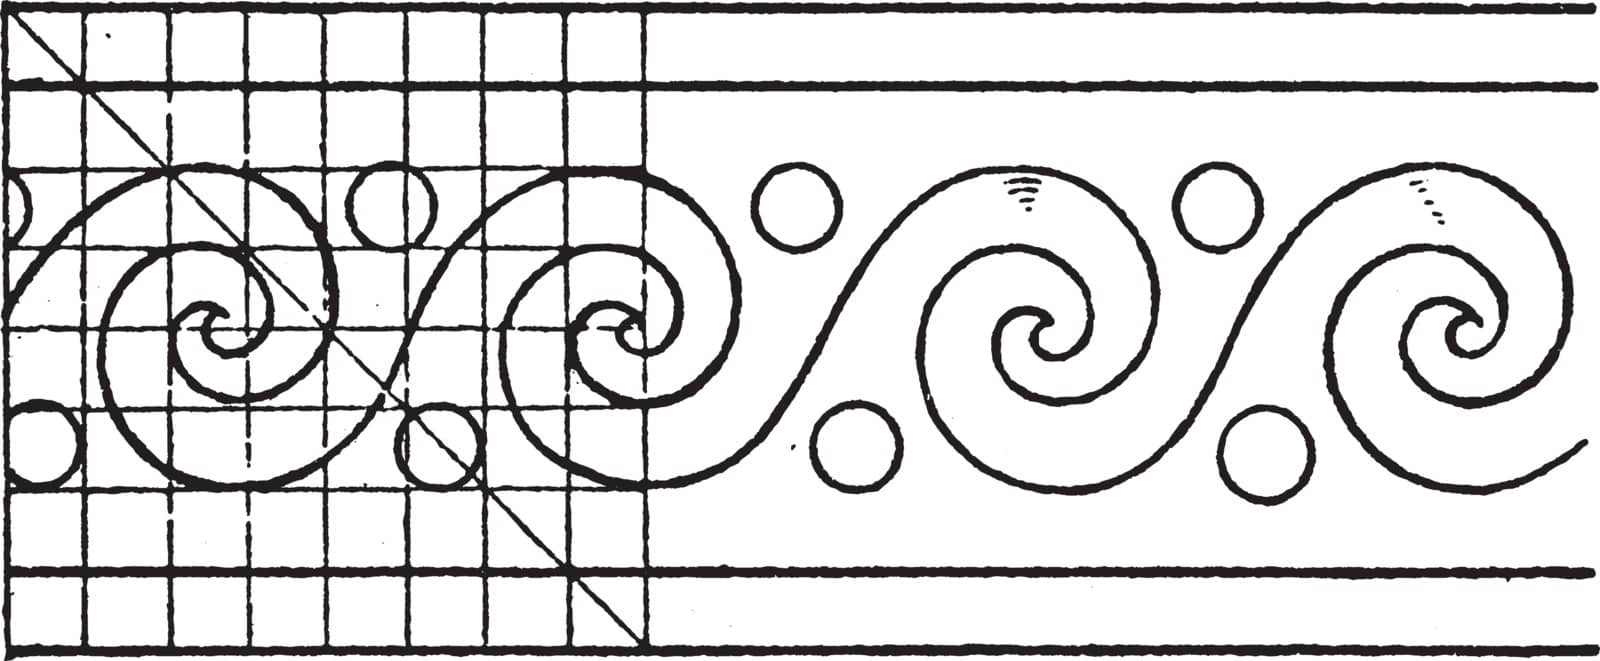 Evolute Spiral Paintings a rectangular pattern, it has a double line border, vintage line drawing or engraving.